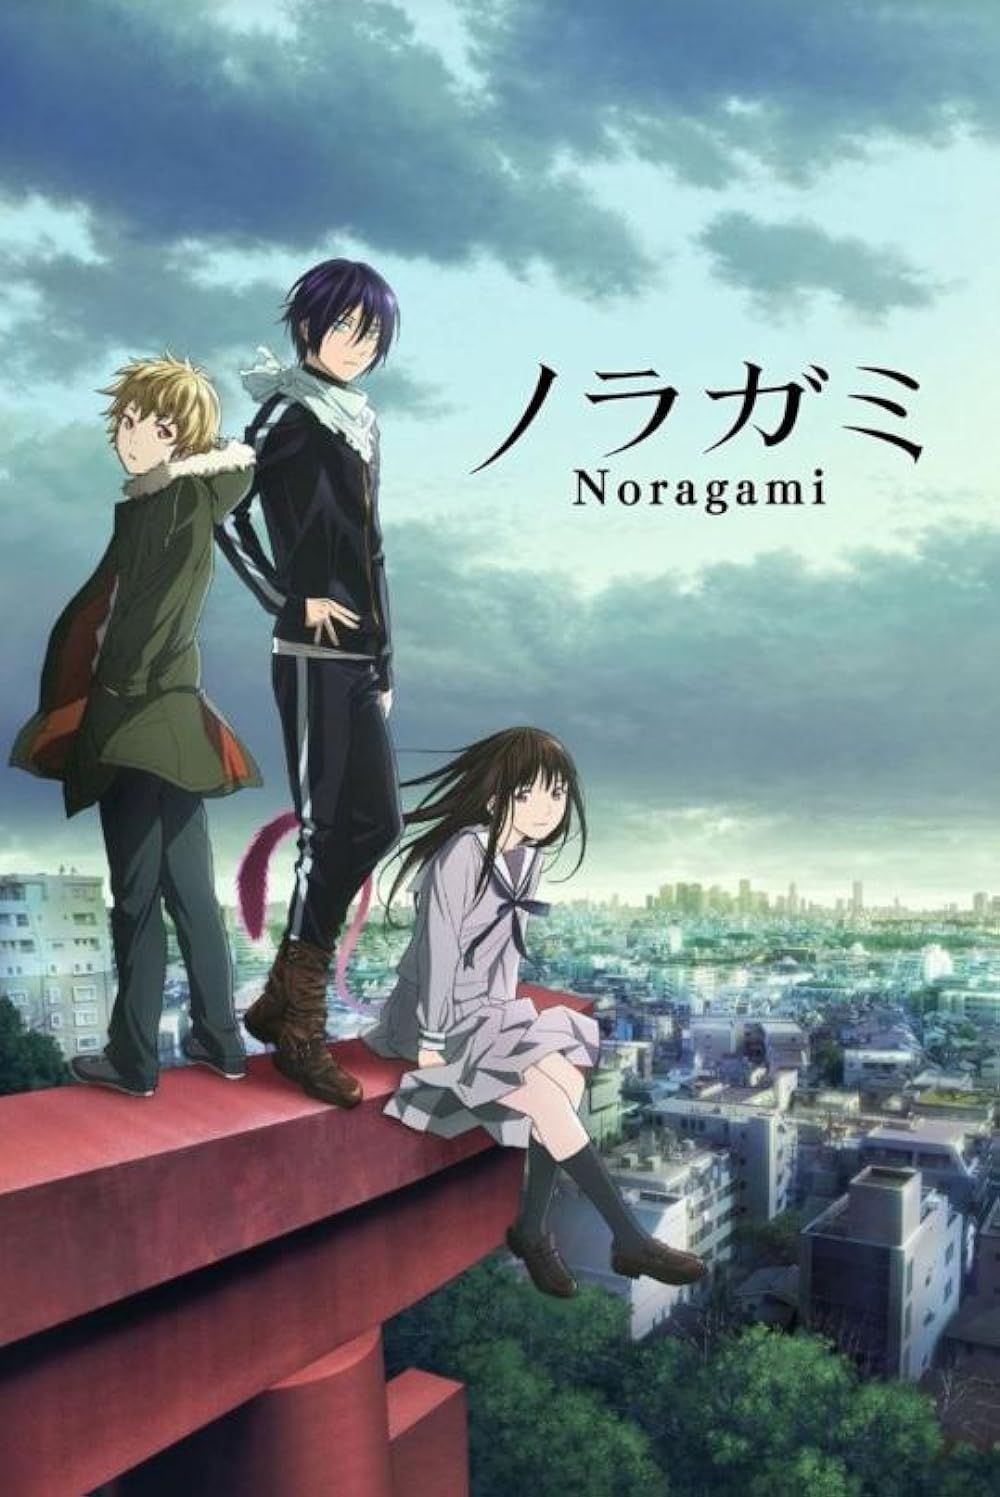 The main cast sitting on the ledge in the Noragami poster